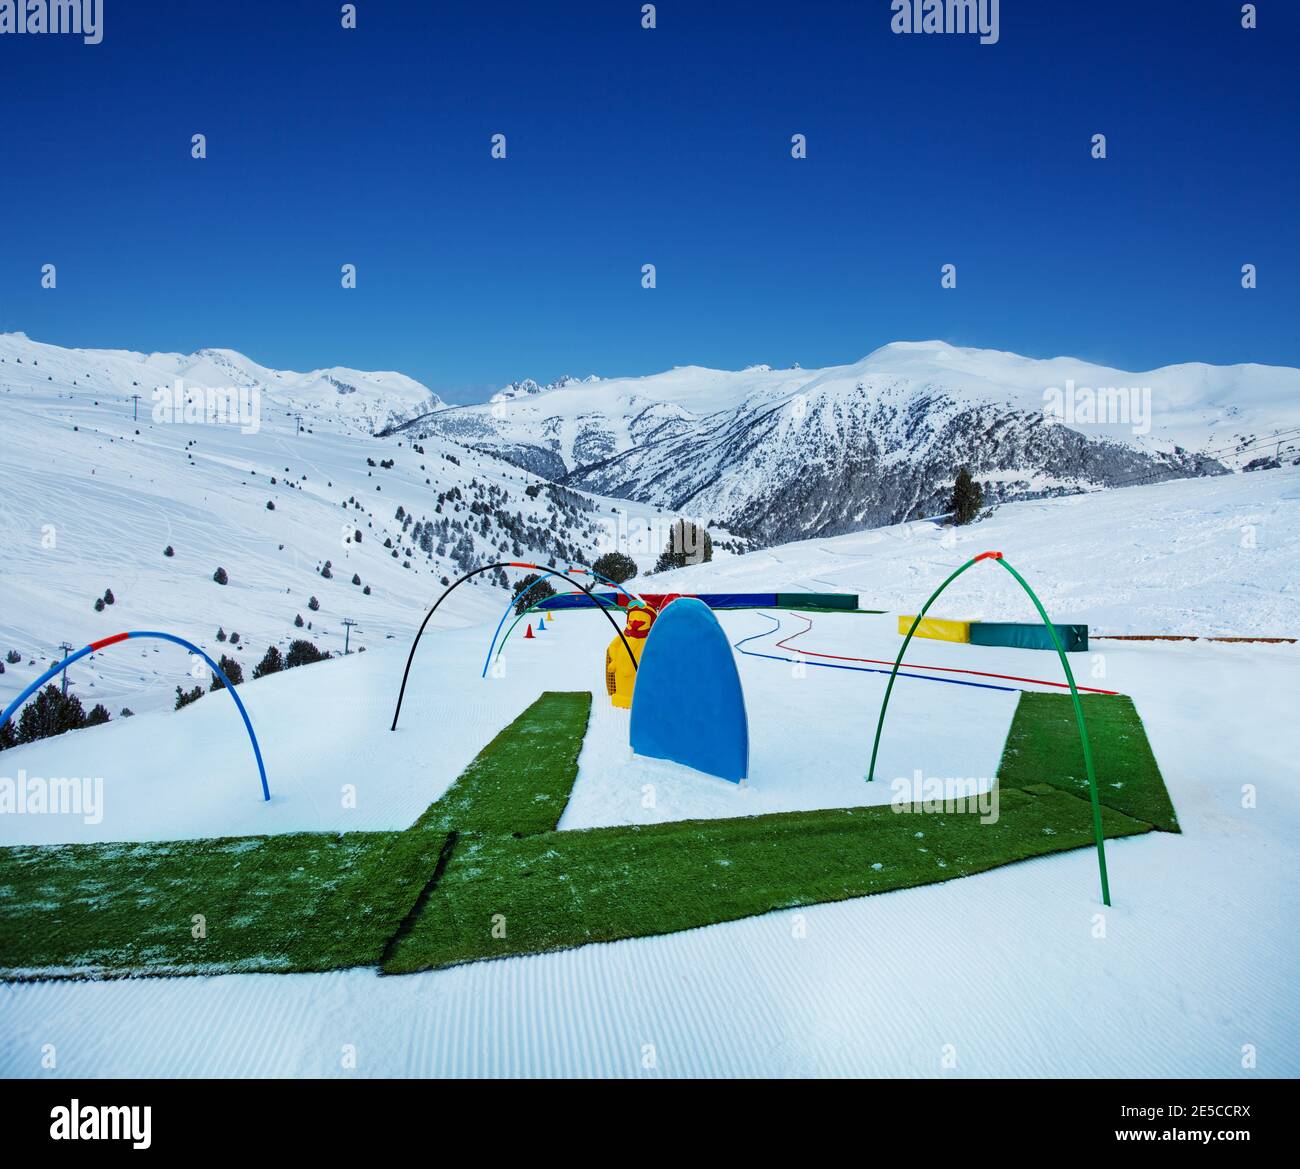 Slope and equipment for small children in infant ski school the mountain in skiing center Stock Photo